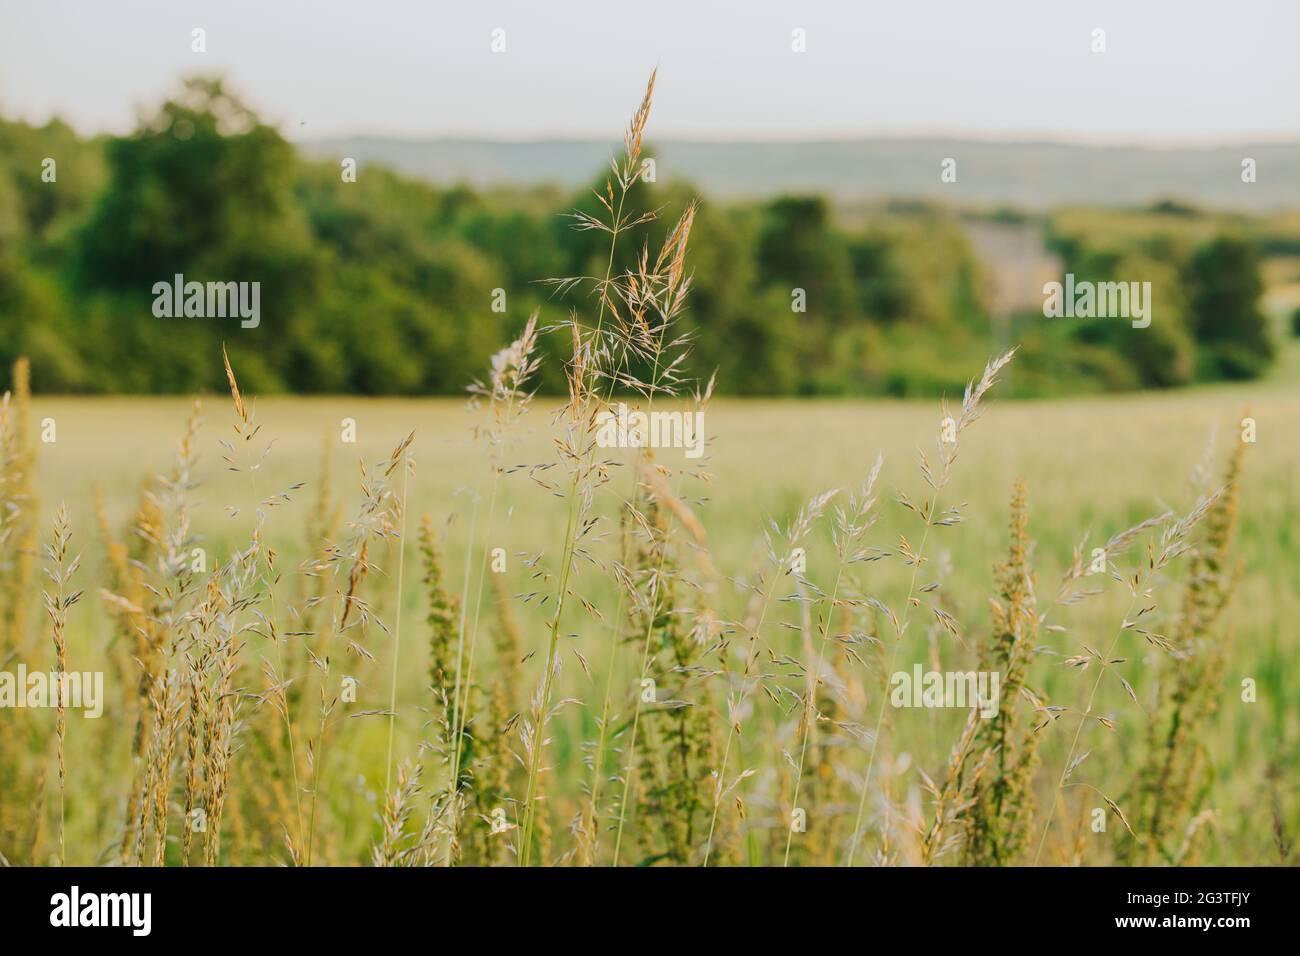 Beautiful background of the field with Wood grass (Sorghastrum nutans) in the foreground Stock Photo